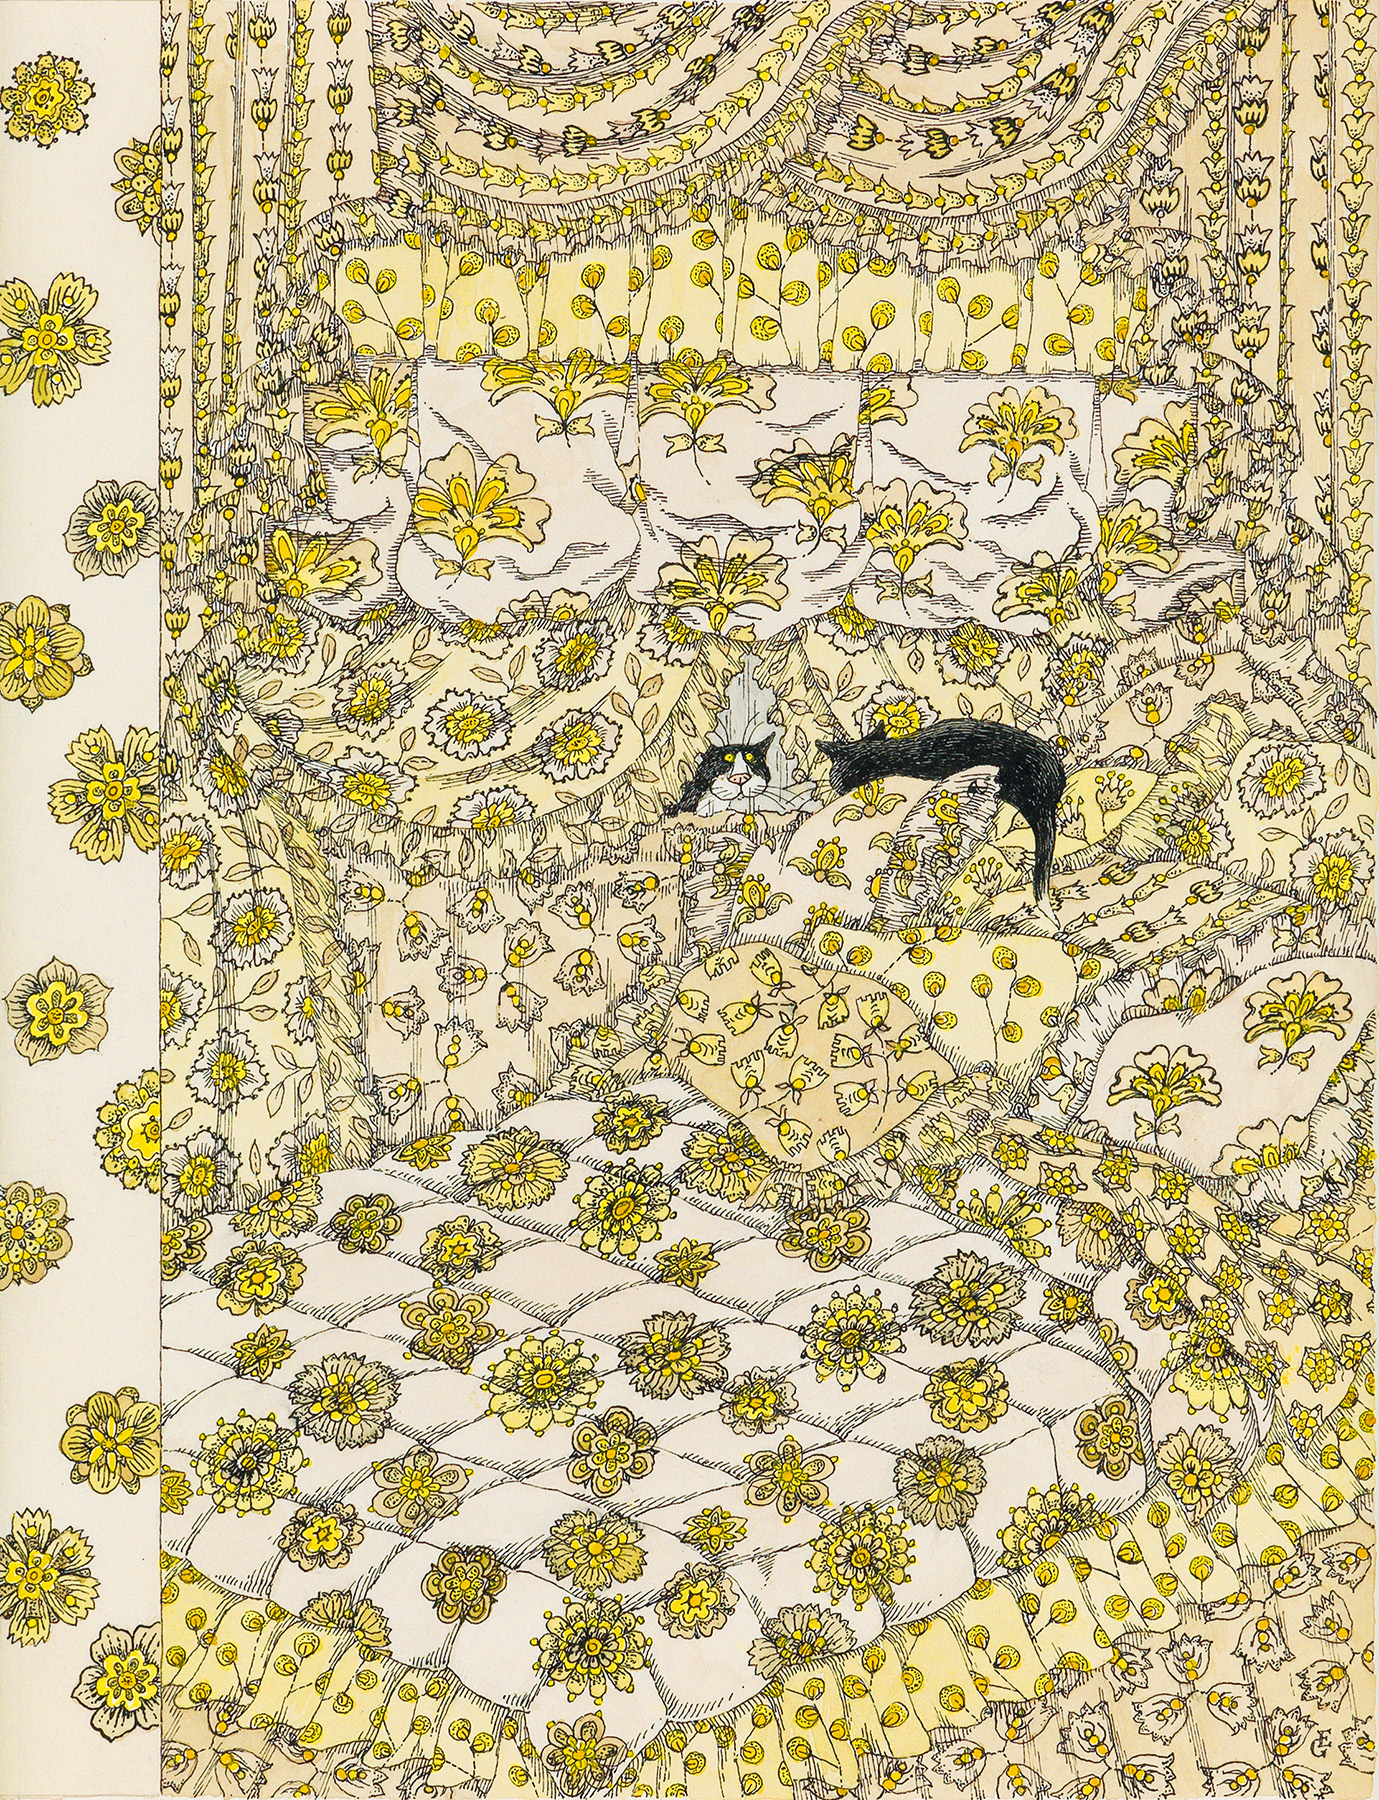 A story on cover art created by Edward Gorey for The New Yorker was the tenth most popular post on The Hot Bid in 2019.